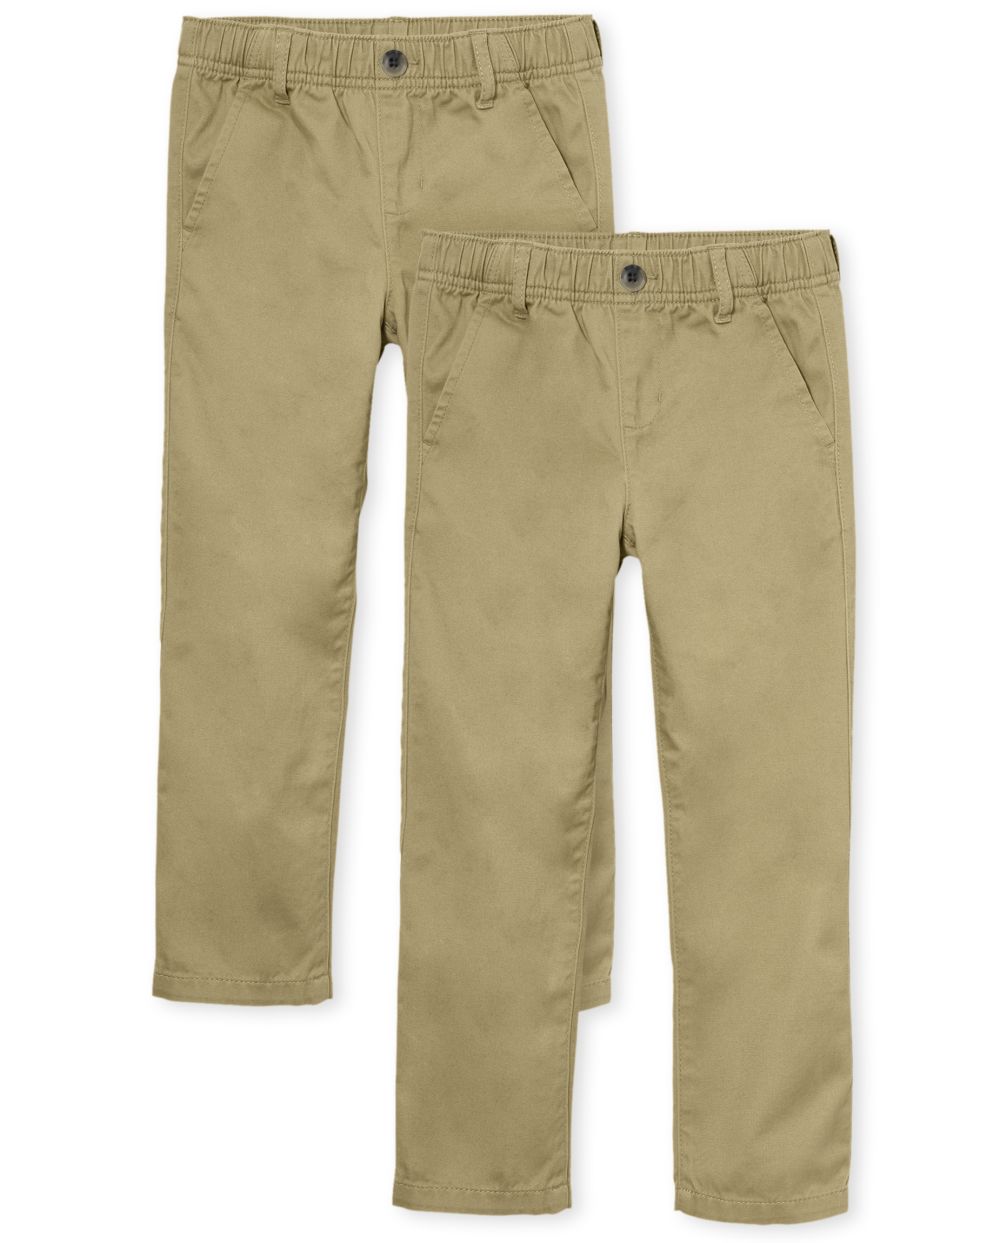 The Children's Place Boys Uniform Stretch Pull On Chino Pants 2-Pack - Tan - 10H